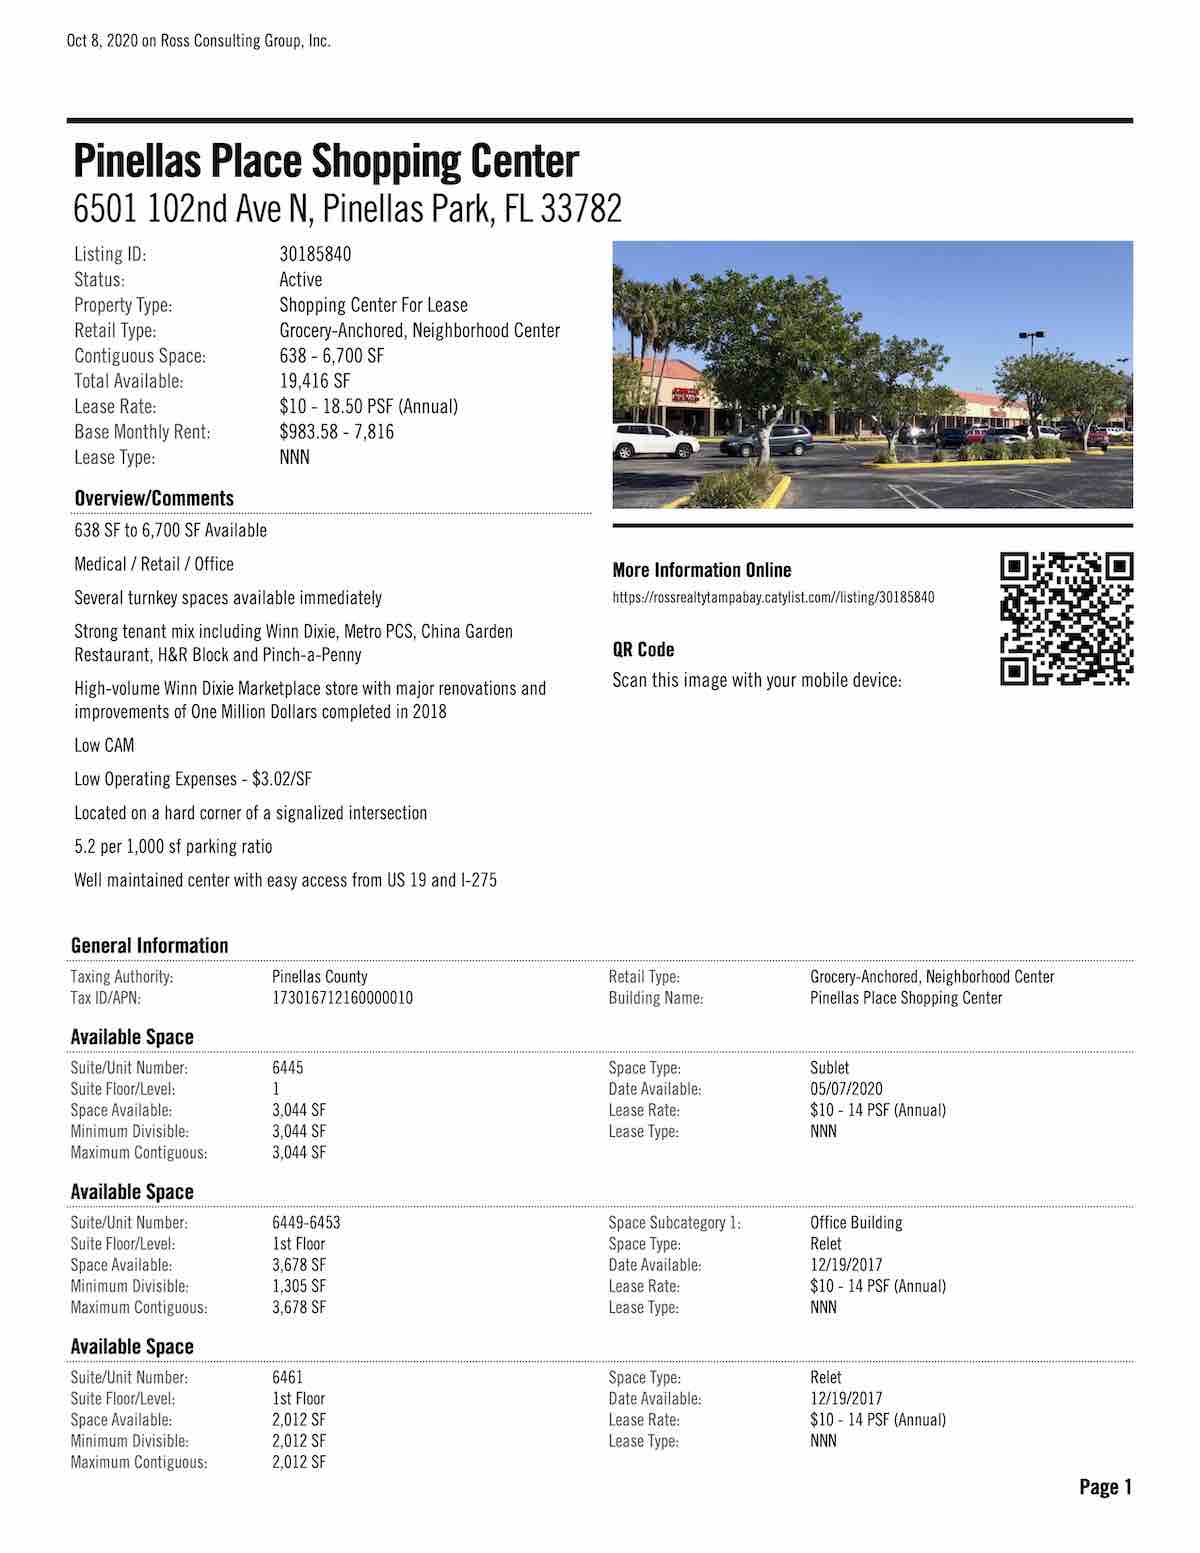 Tampa Commercial Real Estate - FOR LEASE - Pinellas Place Shopping Center - 6501 102nd Ave N, Pinellas Park, FL 33782 P1